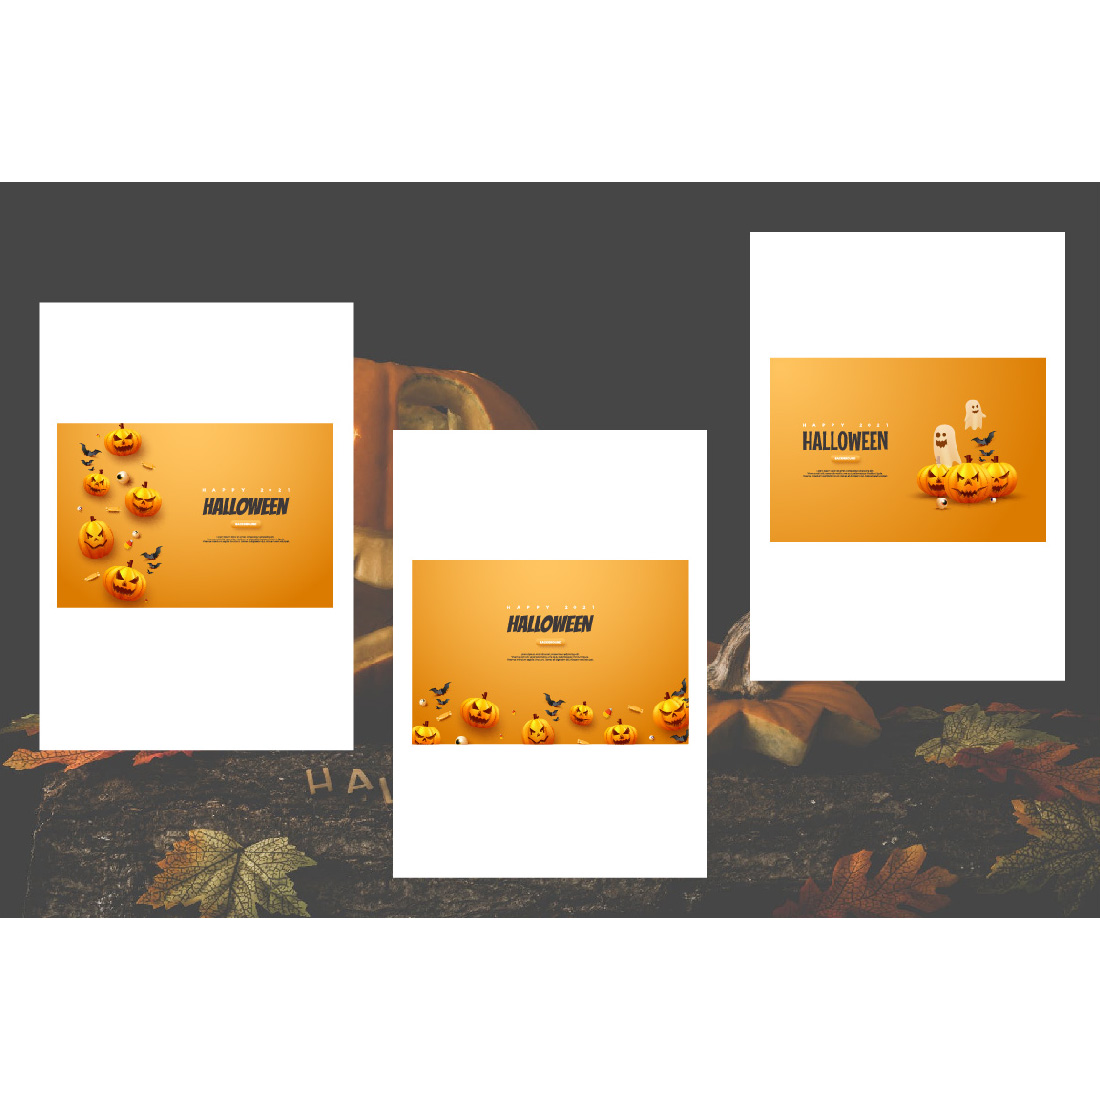 Few pictures of Halloween Pumpkin Illustration Set with Orange Background and Halloween Picture.